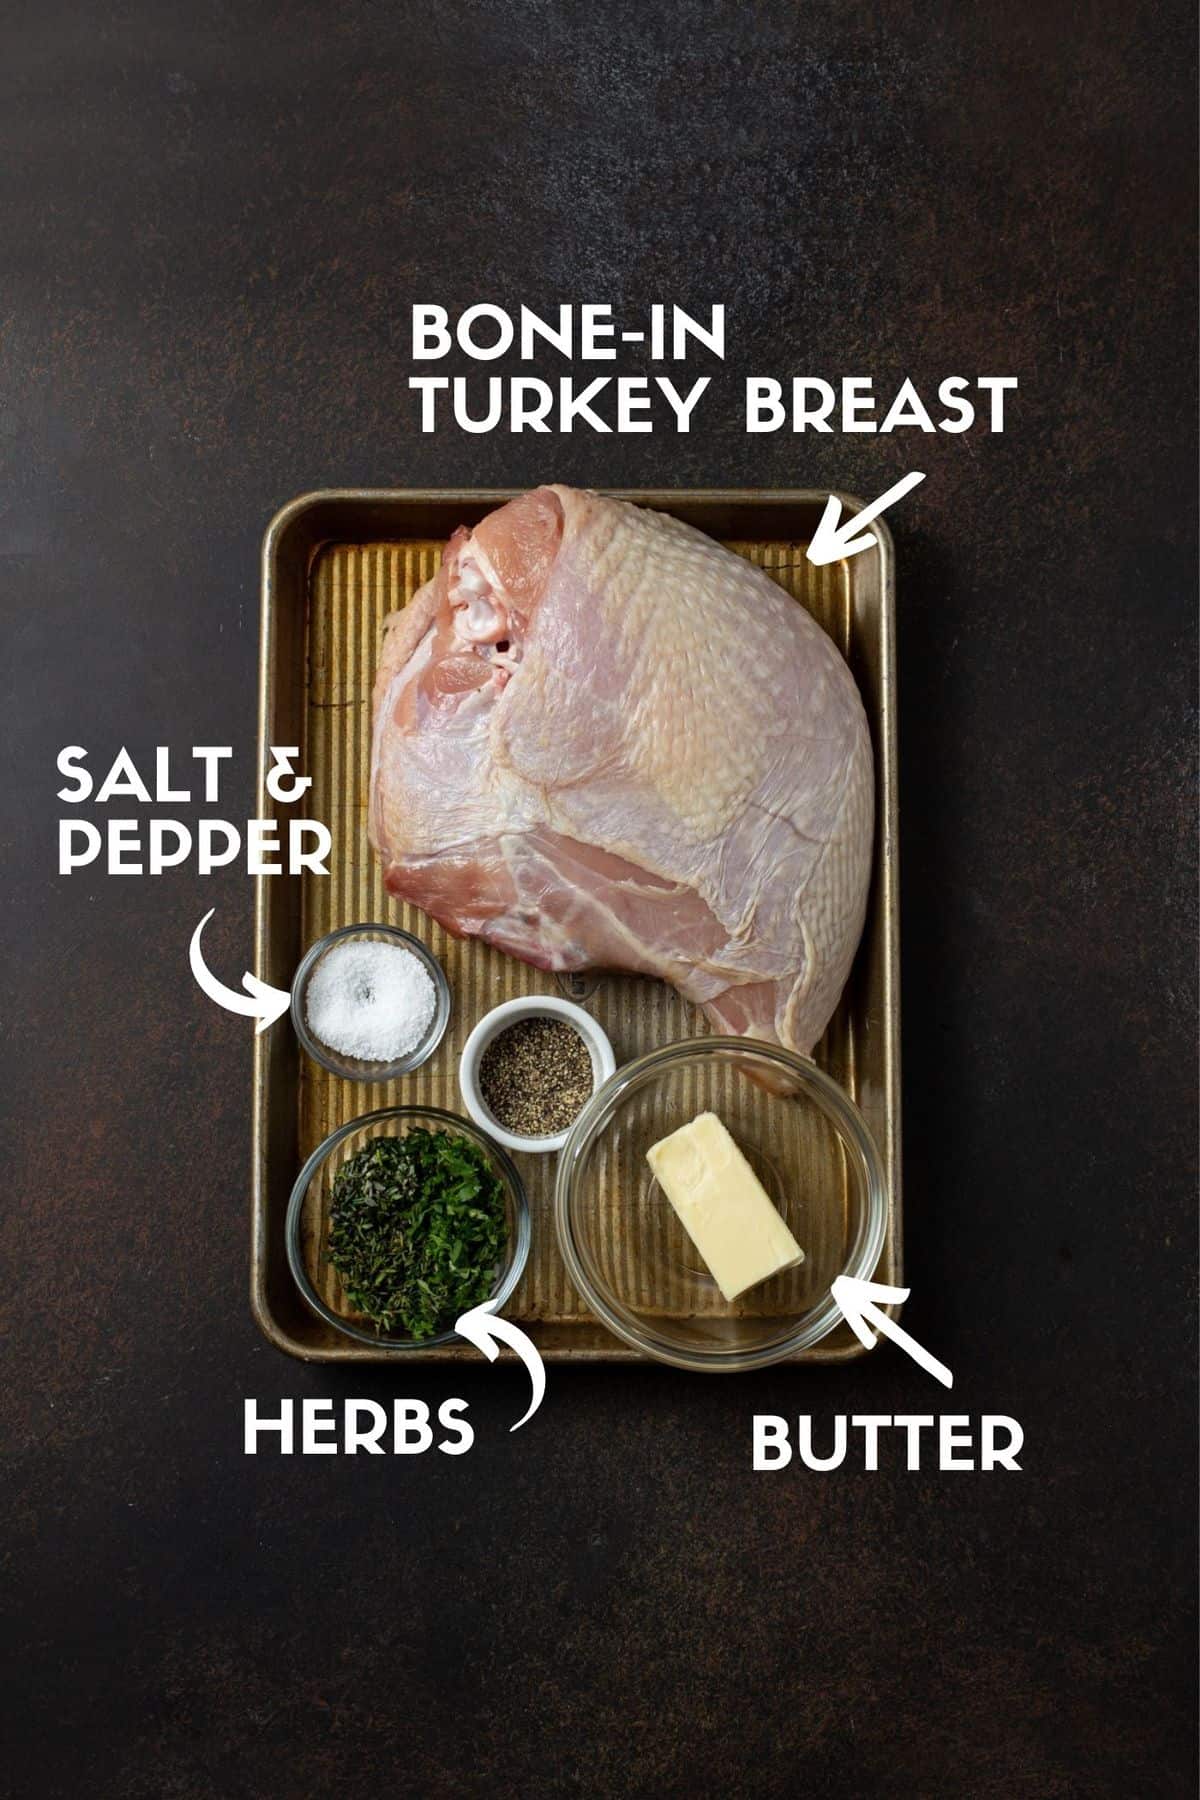 Diagram of ingredients for turkey breast with salt, pepper, herbs and butter.